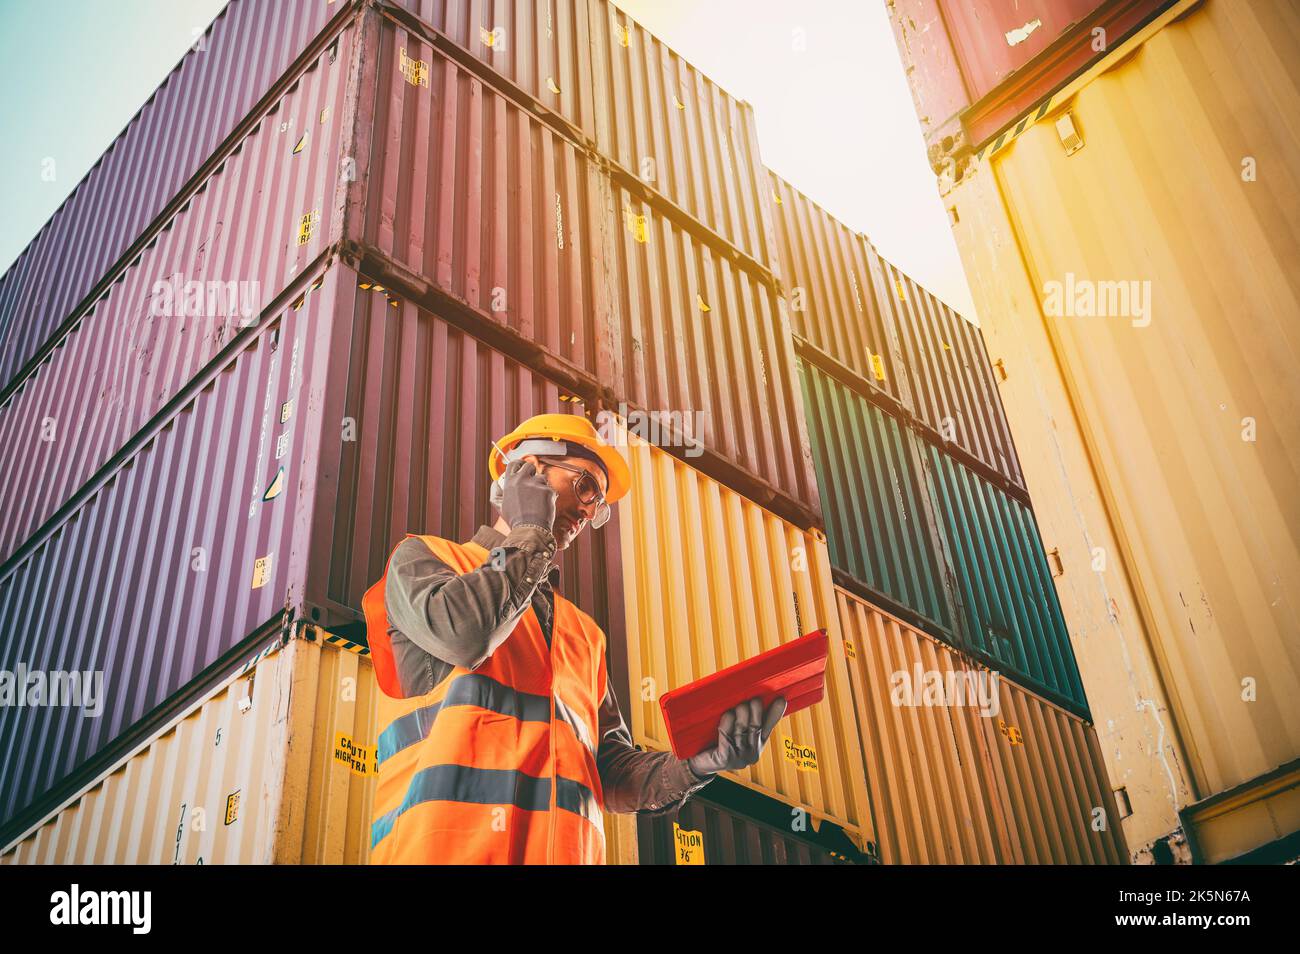 Worker communicate using radio to control loading containers at port cargo Stock Photo